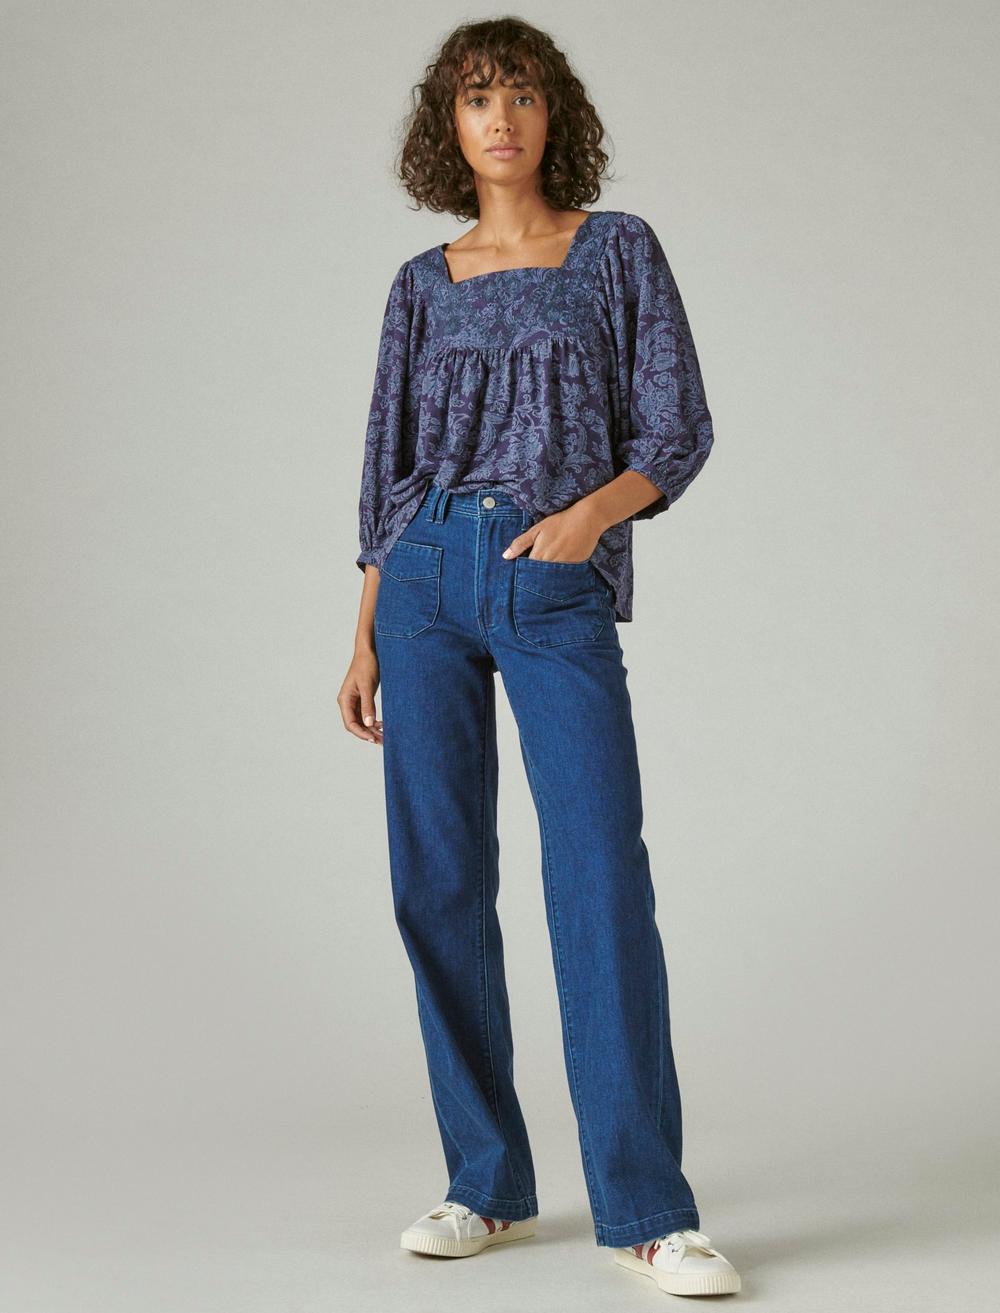 TONAL EMBROIDERED SQUARE NECK BLOUSE, image 2